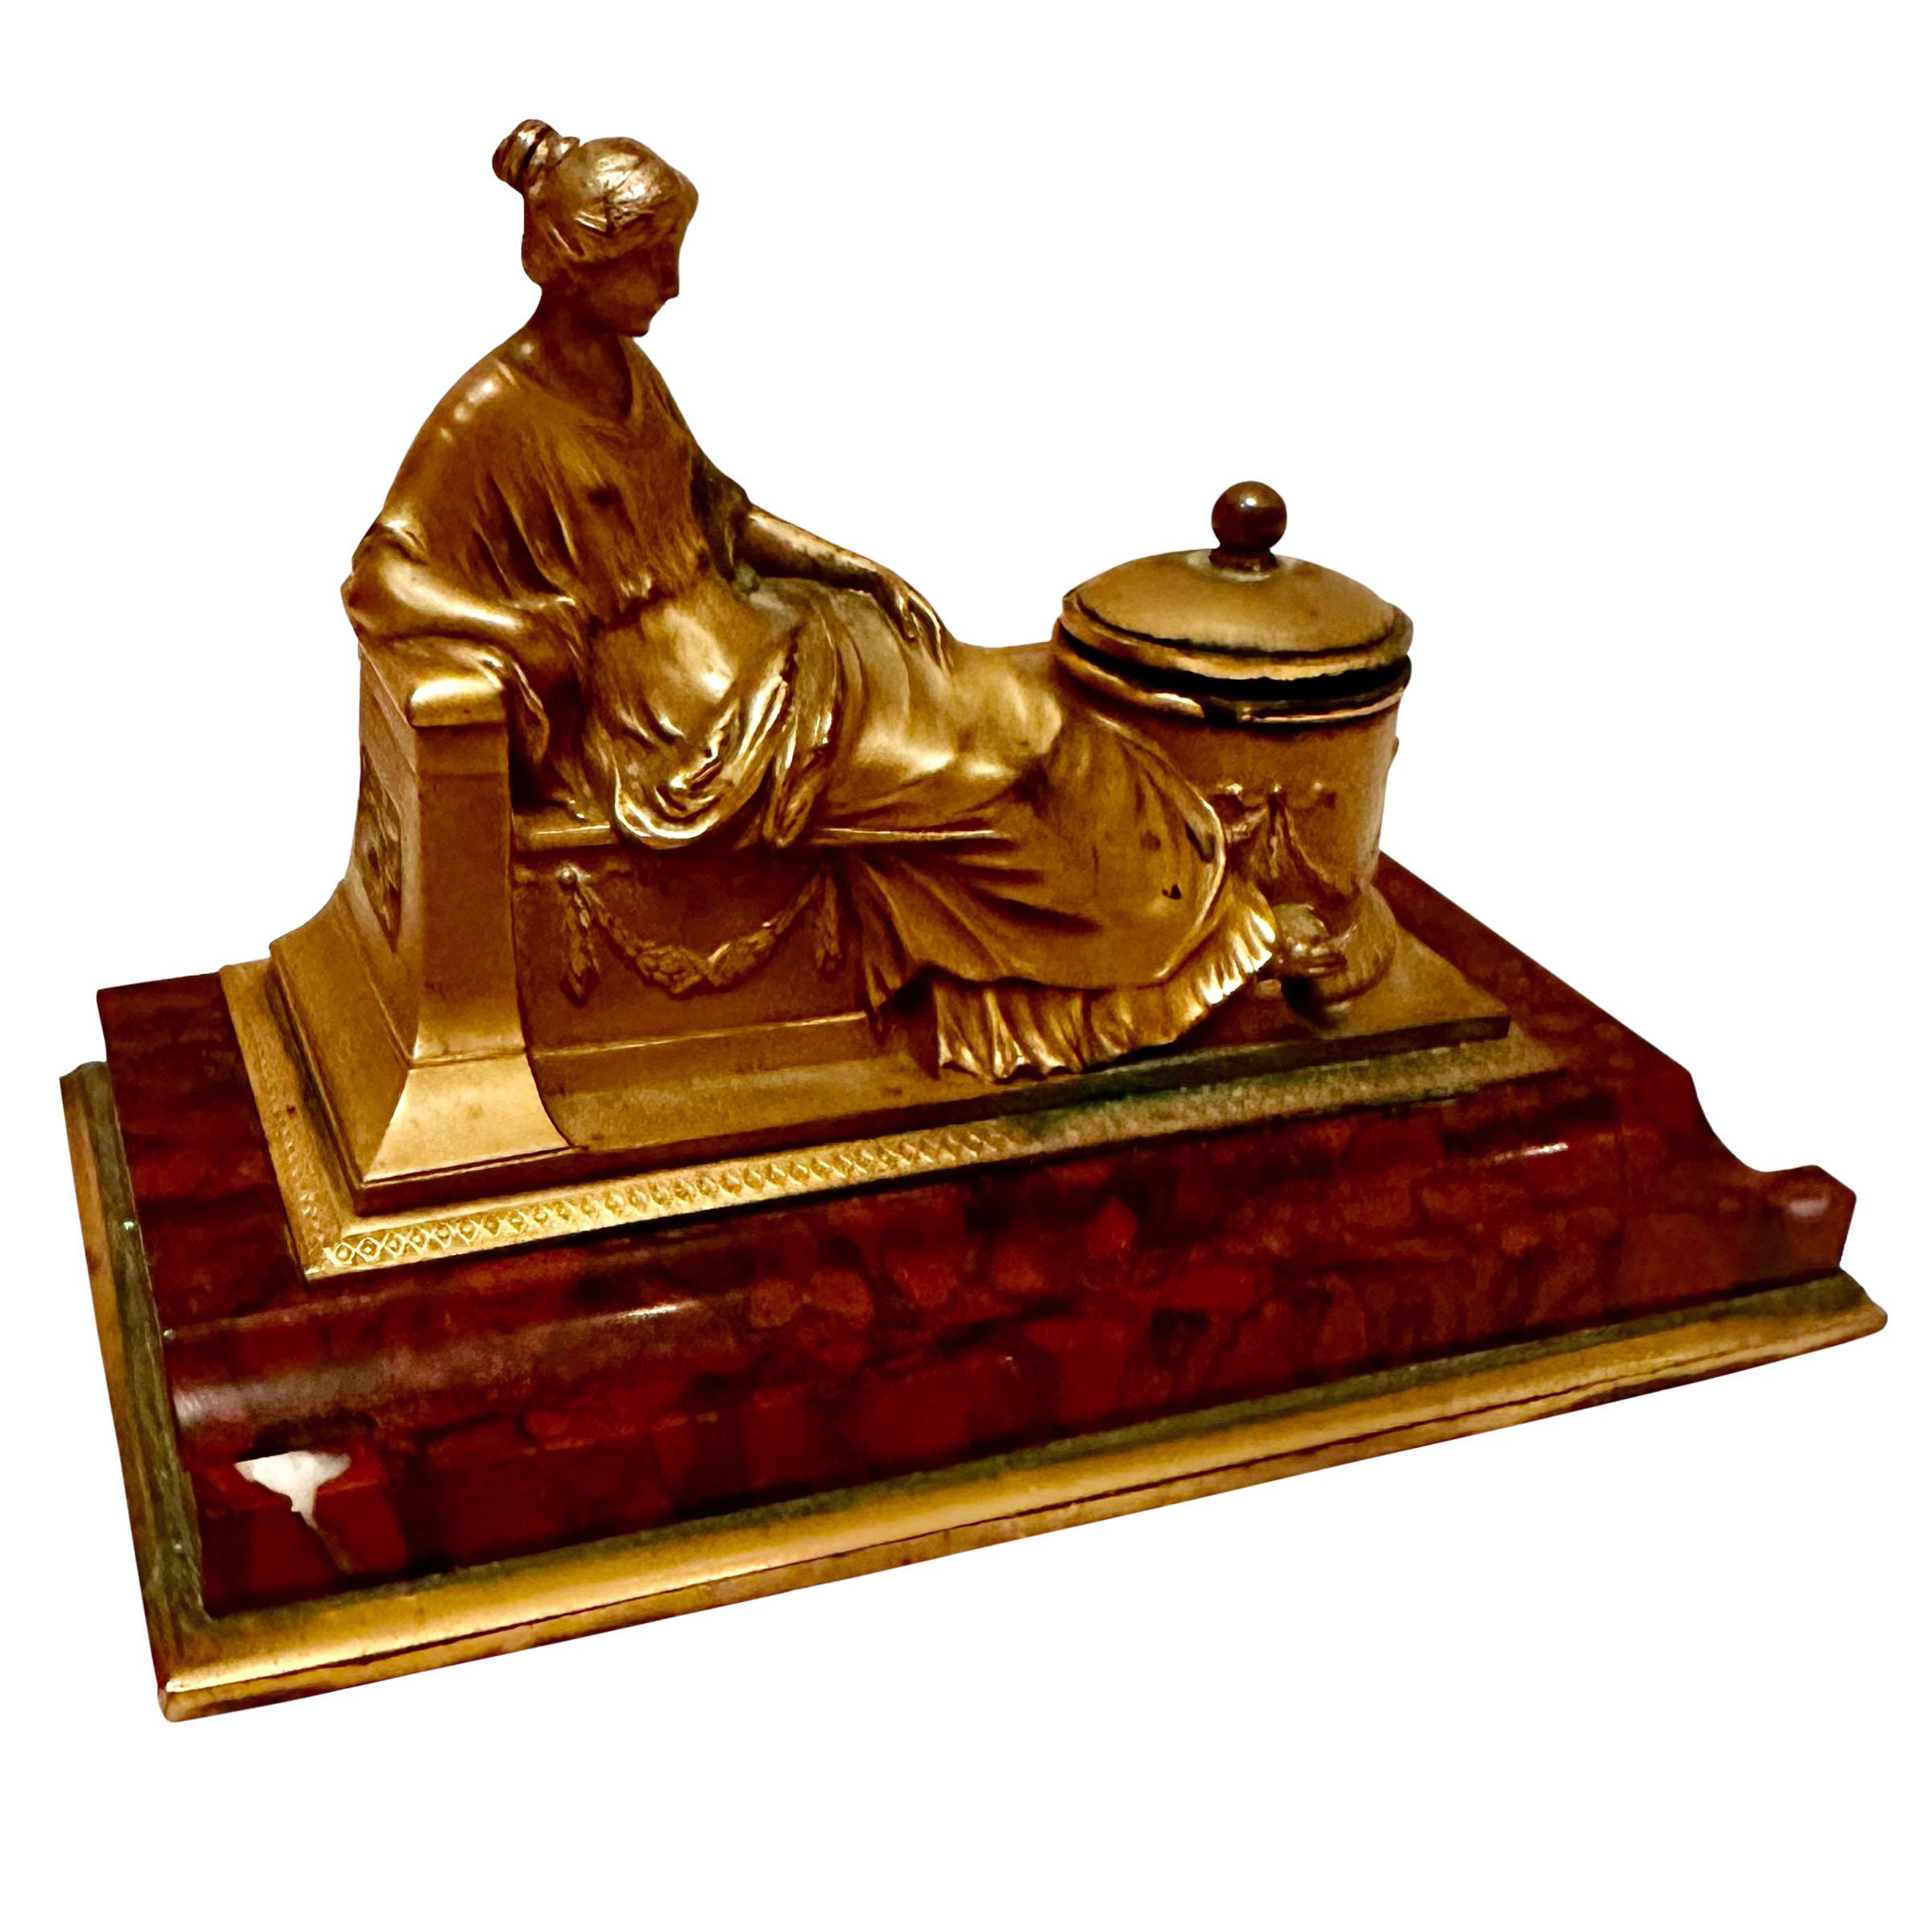 A wonderful antique bronze inkwell with a bronze dore statue of a lady and three inch deep ink dispenser. All on a rouge marble base that has an area for a pen or pencil.  A brass plate is at the bottom. German, late 19th century, signed